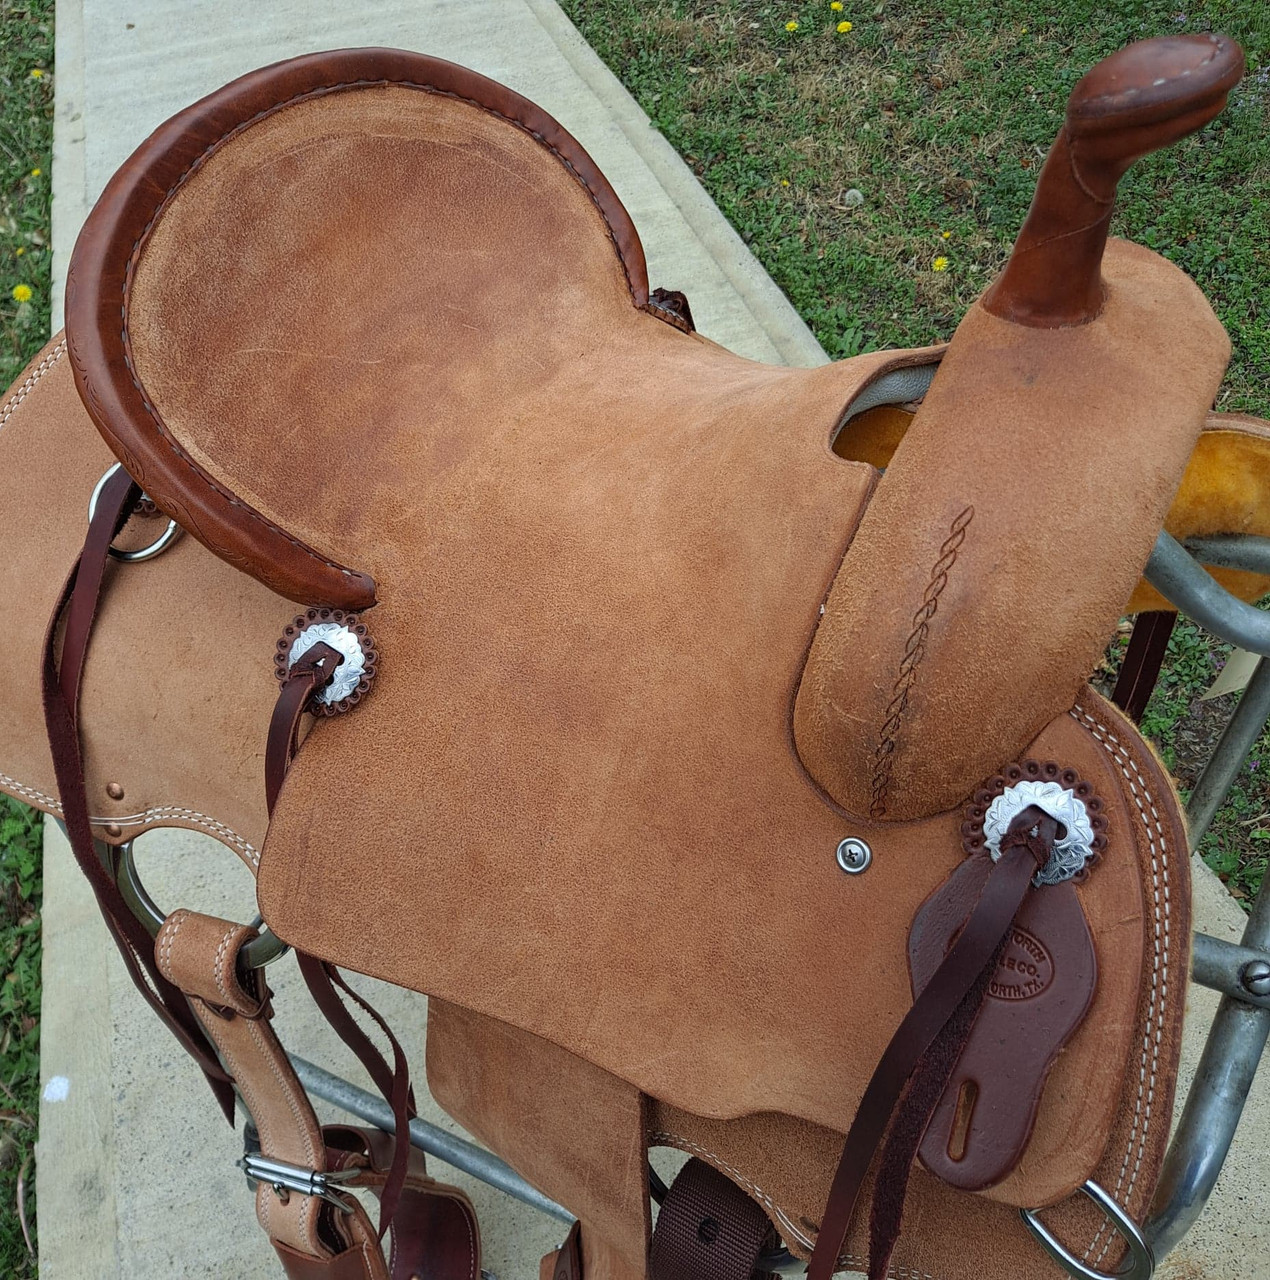 New Cheyenne j2 Stock Saddle by Fort Worth Saddle Co with 14 inch seat. Premium leather in light oil roughout. Secure pencil roll seat. Gullet size is 8 inch, weight is 30lbs, and skirt is 25 inch. Made in USA. Limited lifetime warranty.

S1247